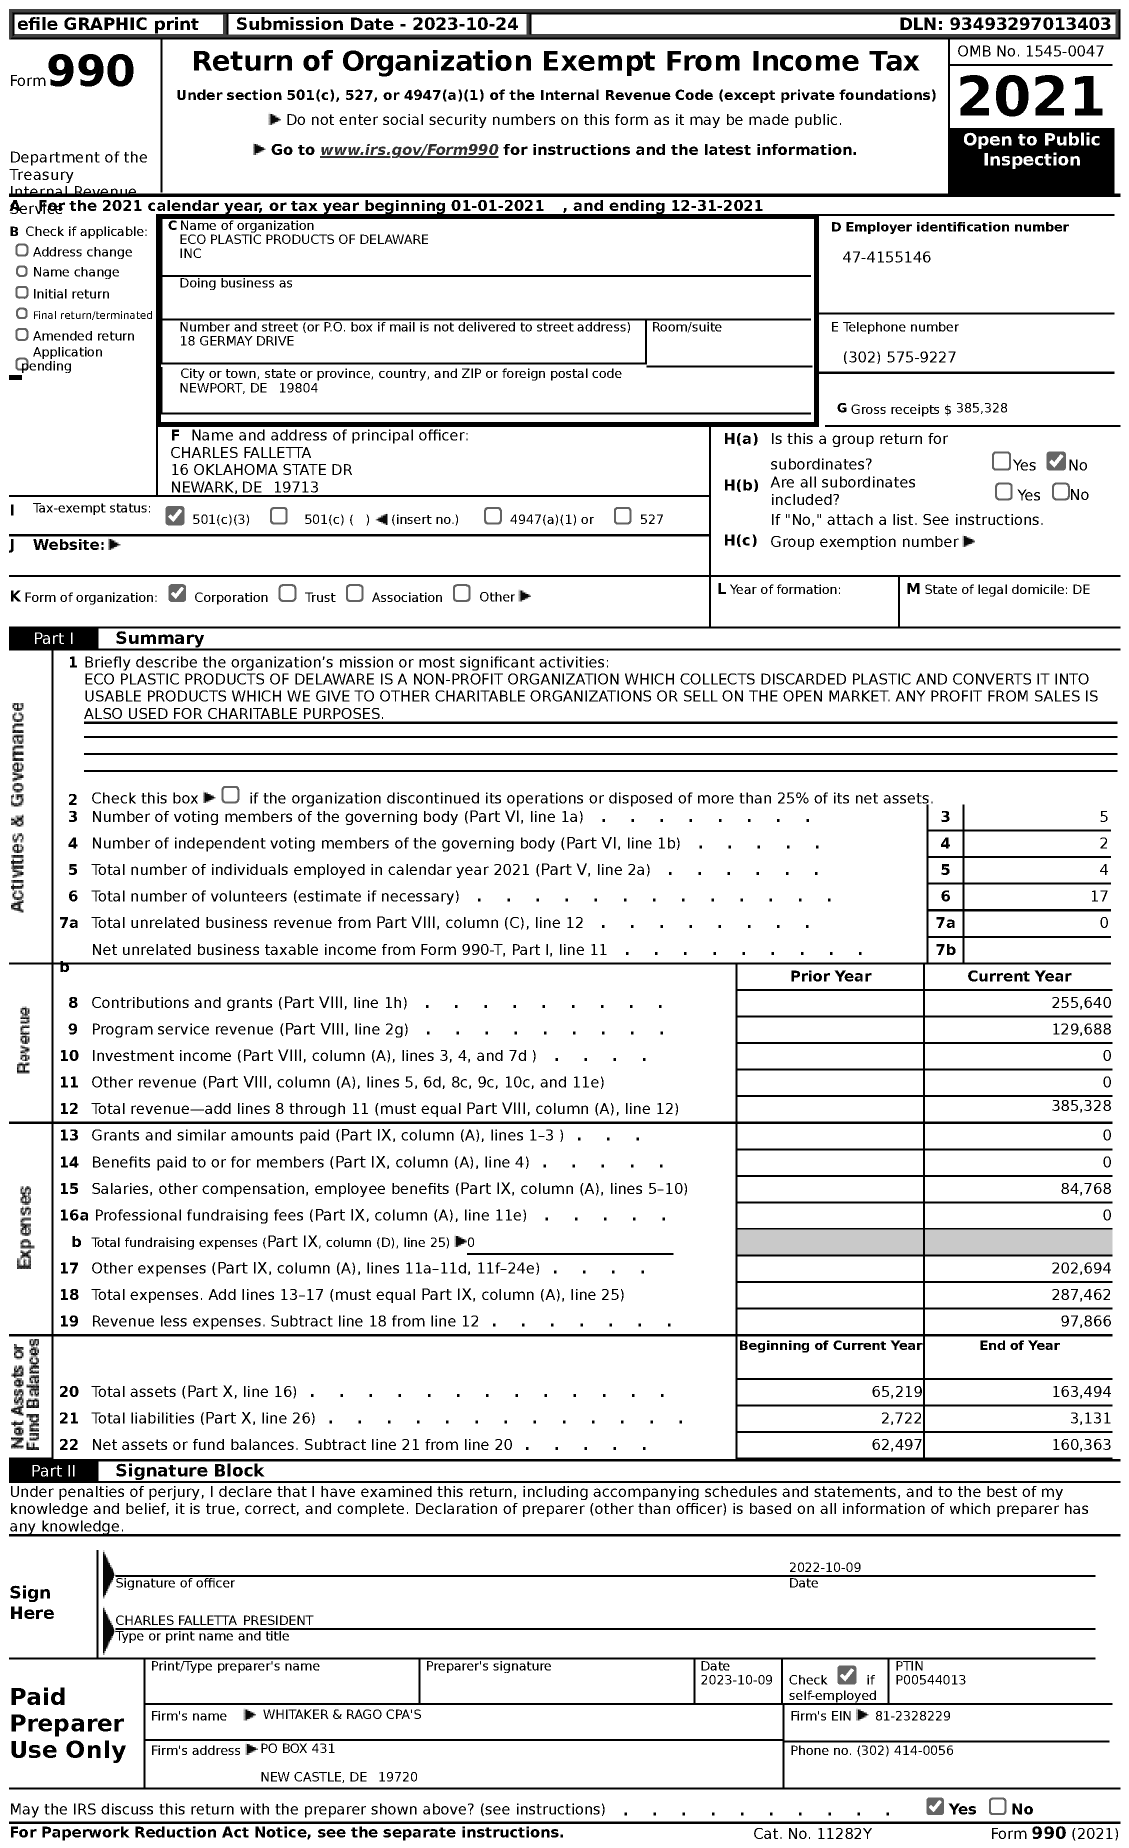 Image of first page of 2021 Form 990 for Eco Plastic Products of Delaware